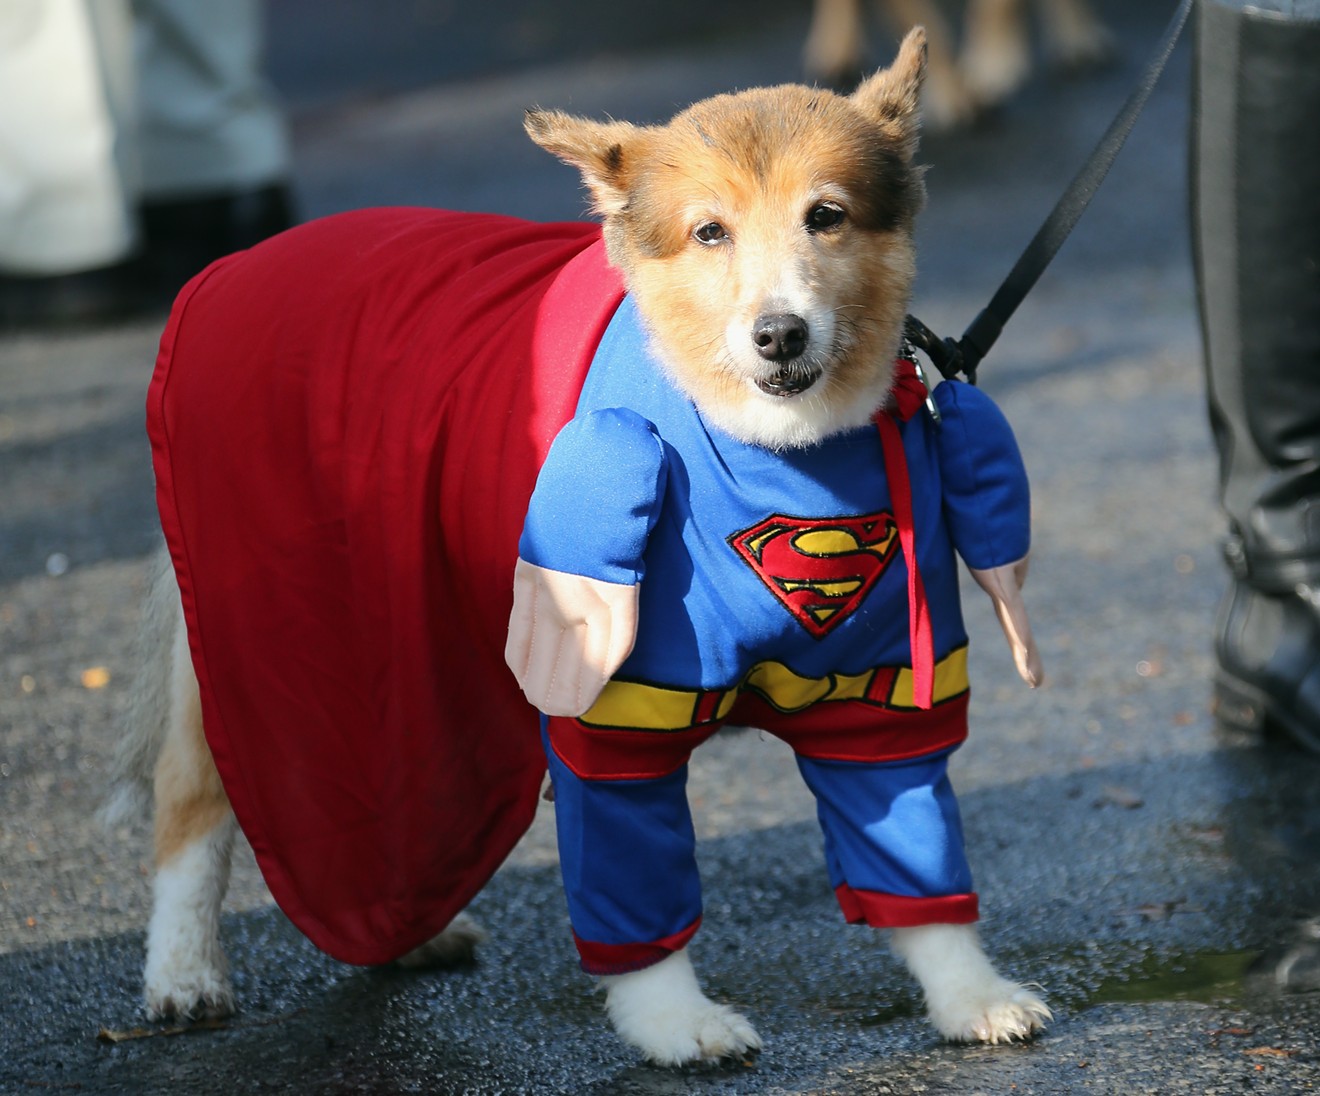 What's cuter than babies in costumes? Pets in costumes. OK, they're both pretty cute.